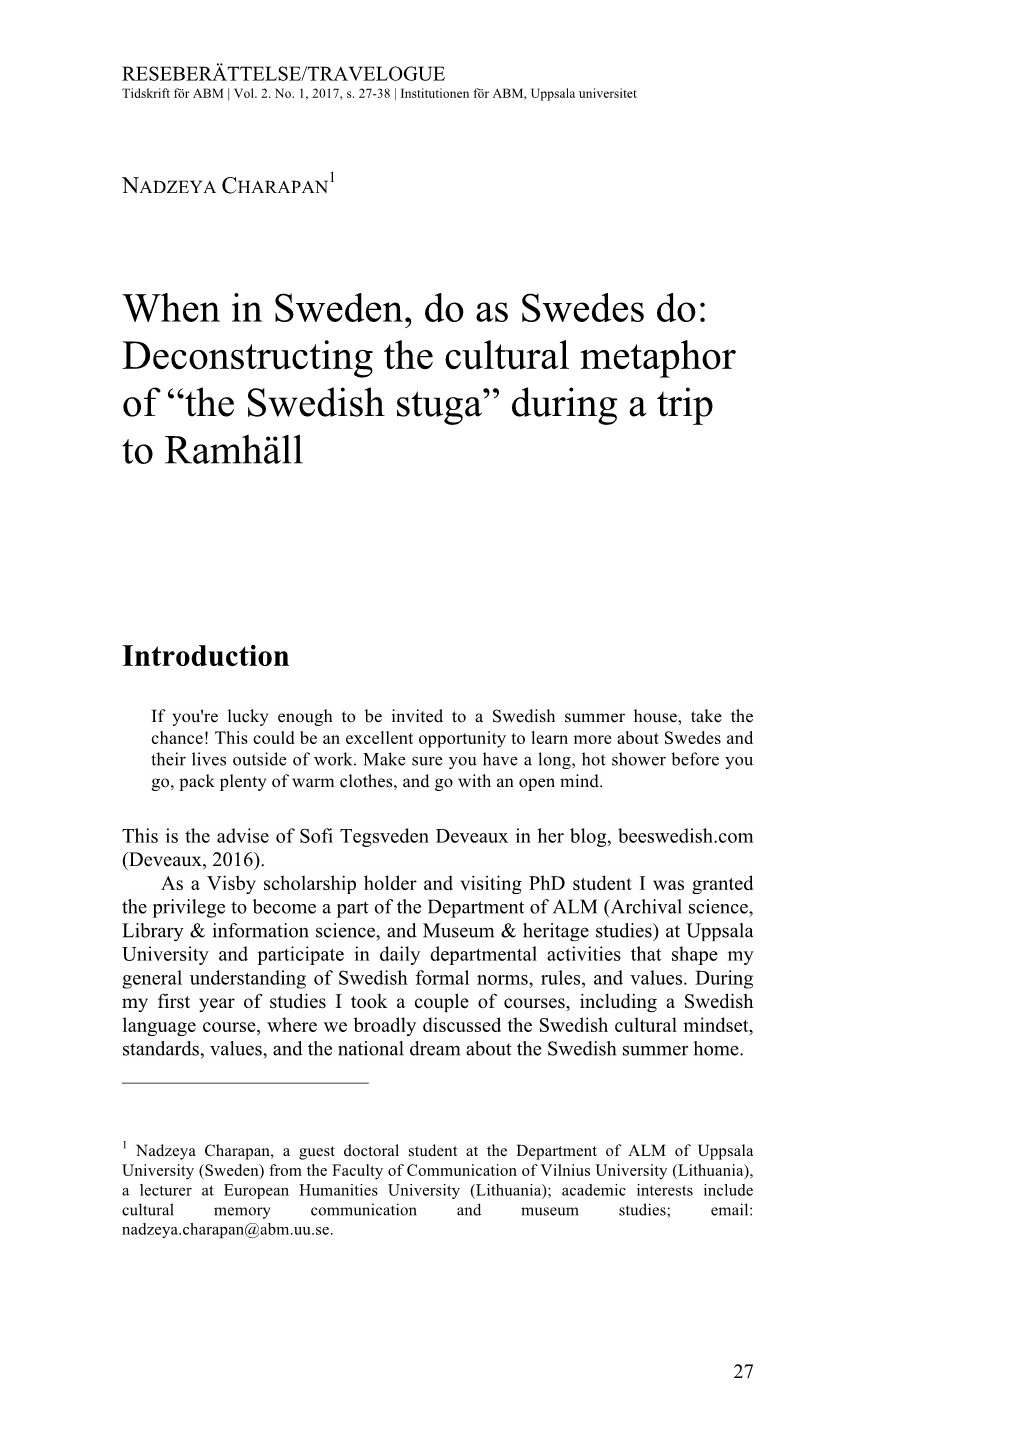 When in Sweden, Do As Swedes Do: Deconstructing the Cultural Metaphor of “The Swedish Stuga” During a Trip to Ramhäll